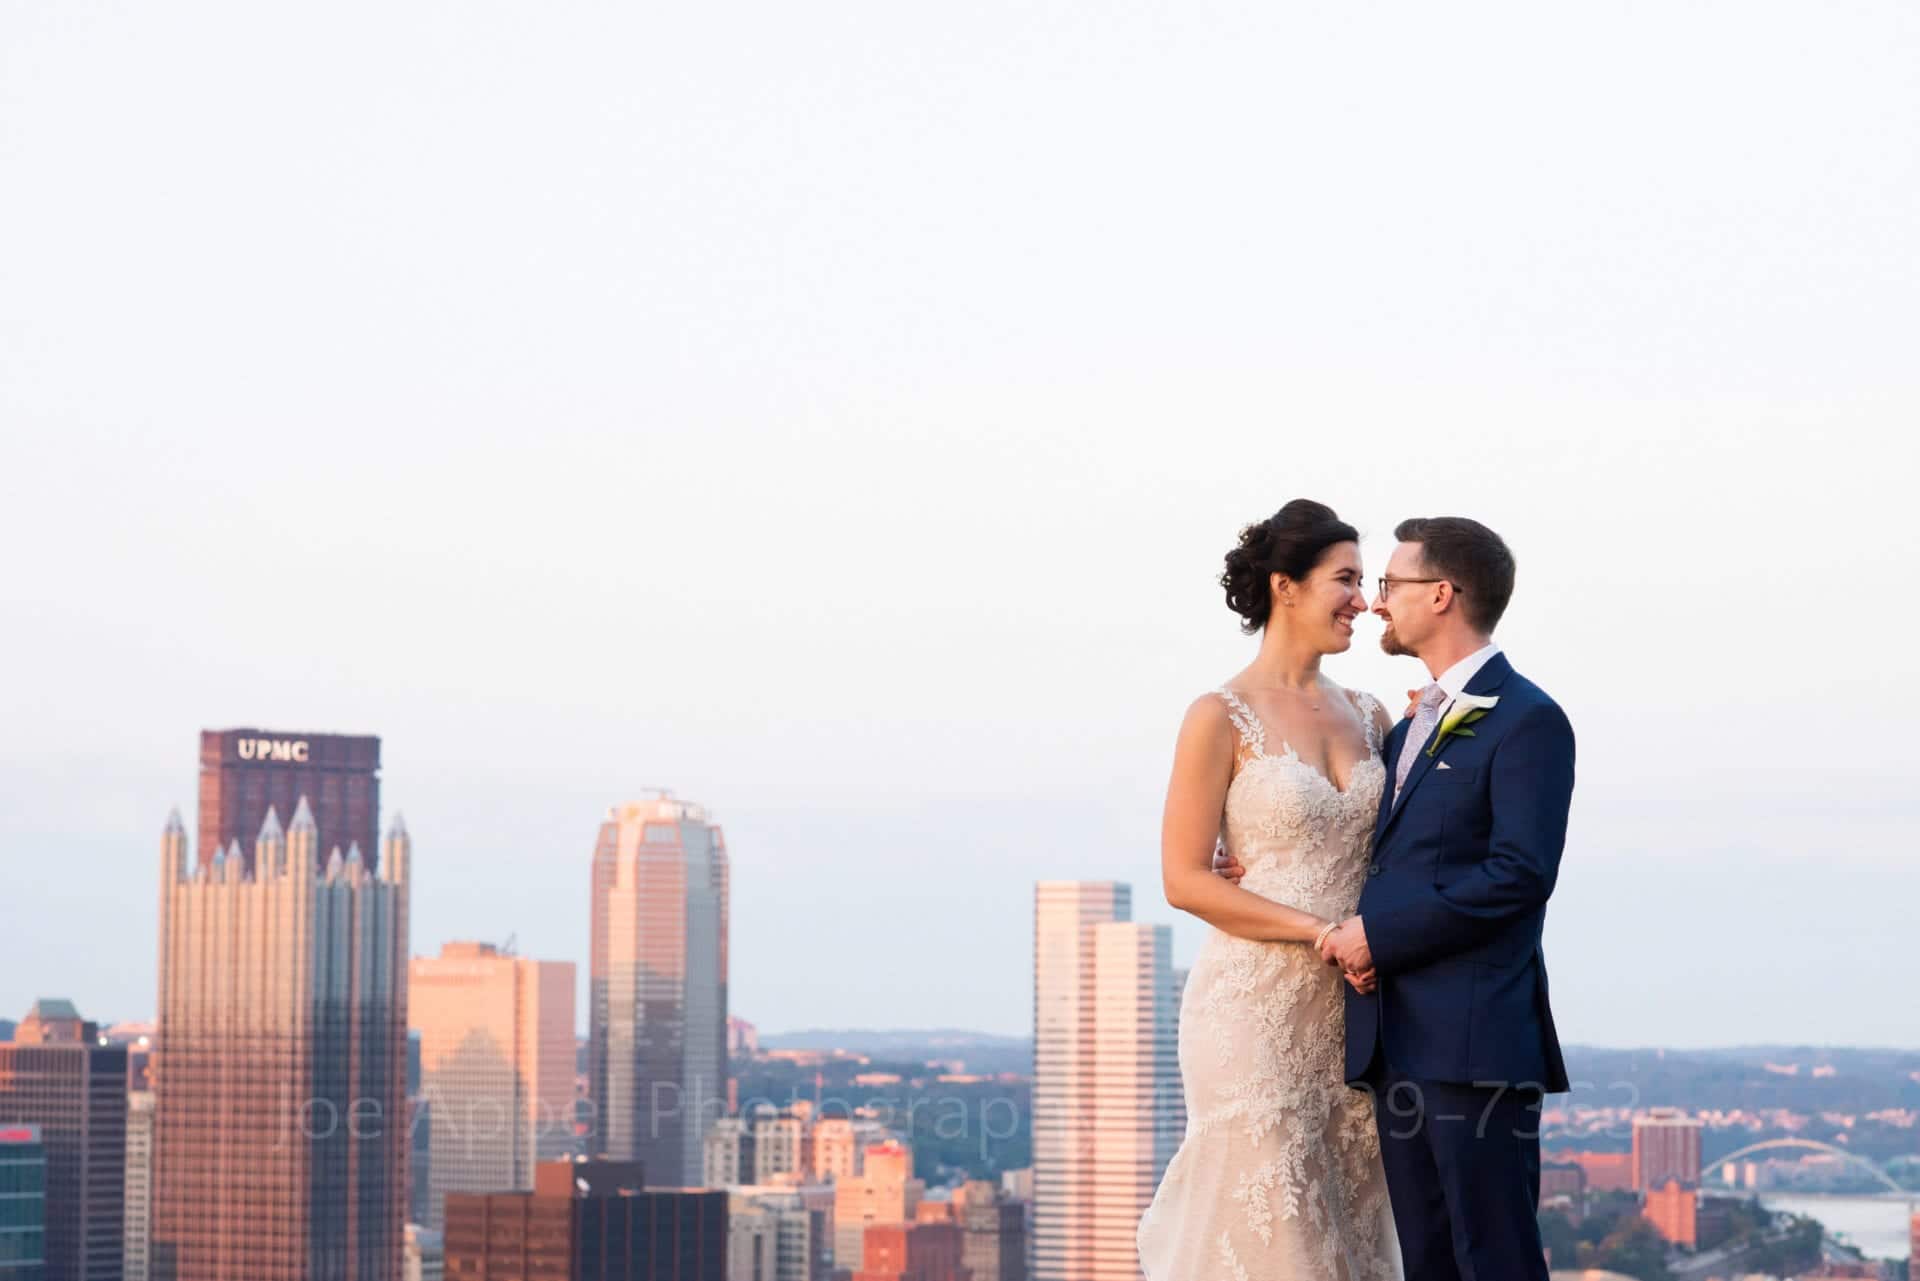 A bride and groom face each other as they stand high above the skyline of the city of Pittsburgh at sunset.